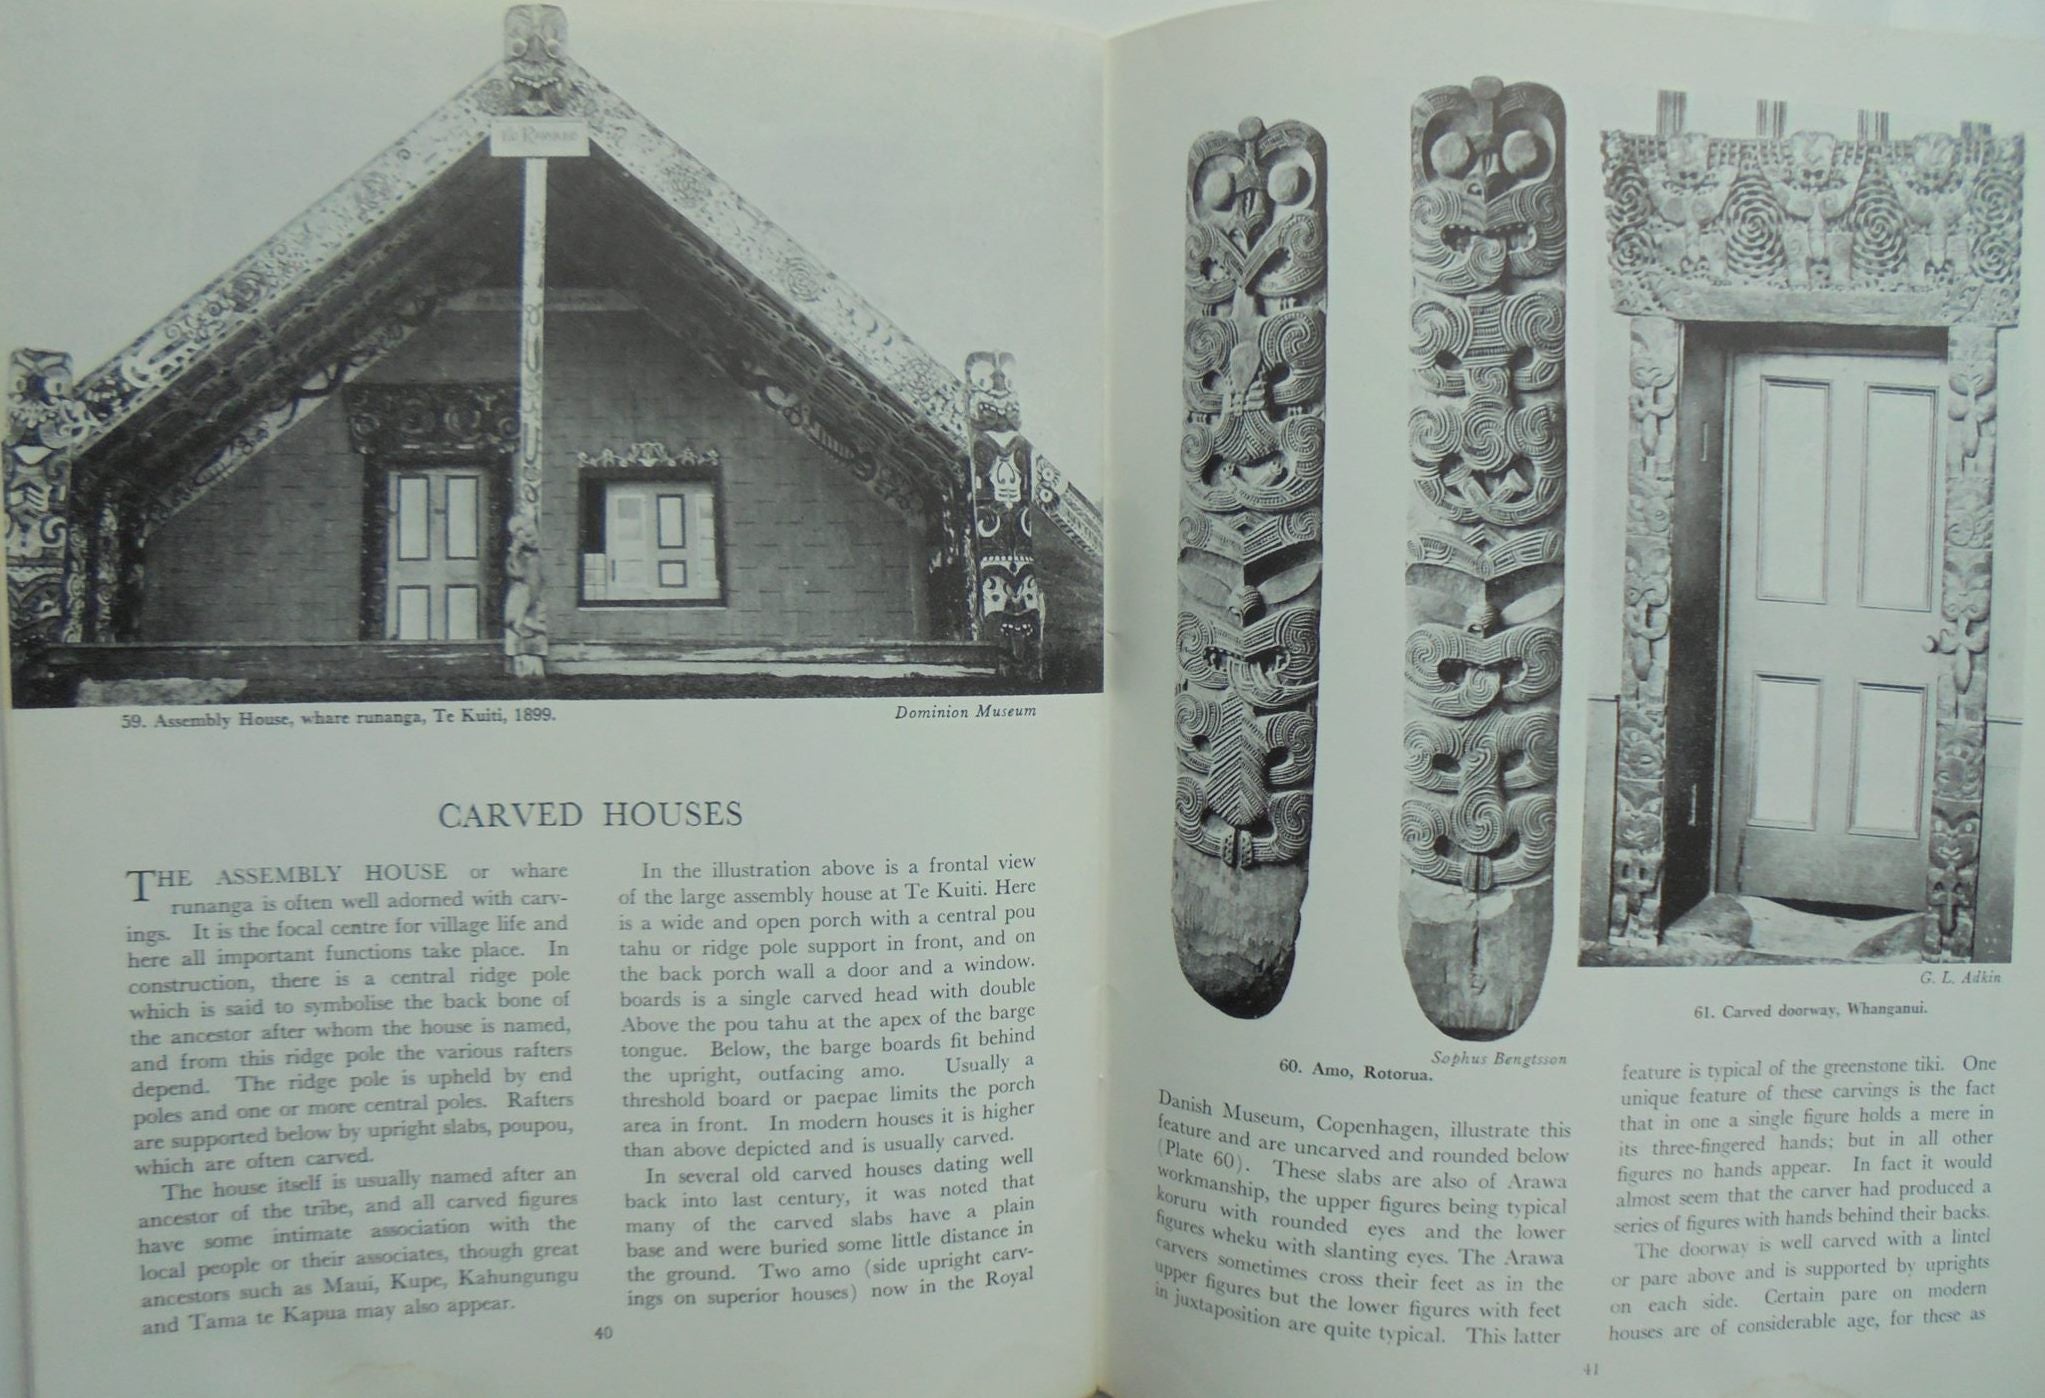 Maori Carving Illustrated by W. J. Phillipps